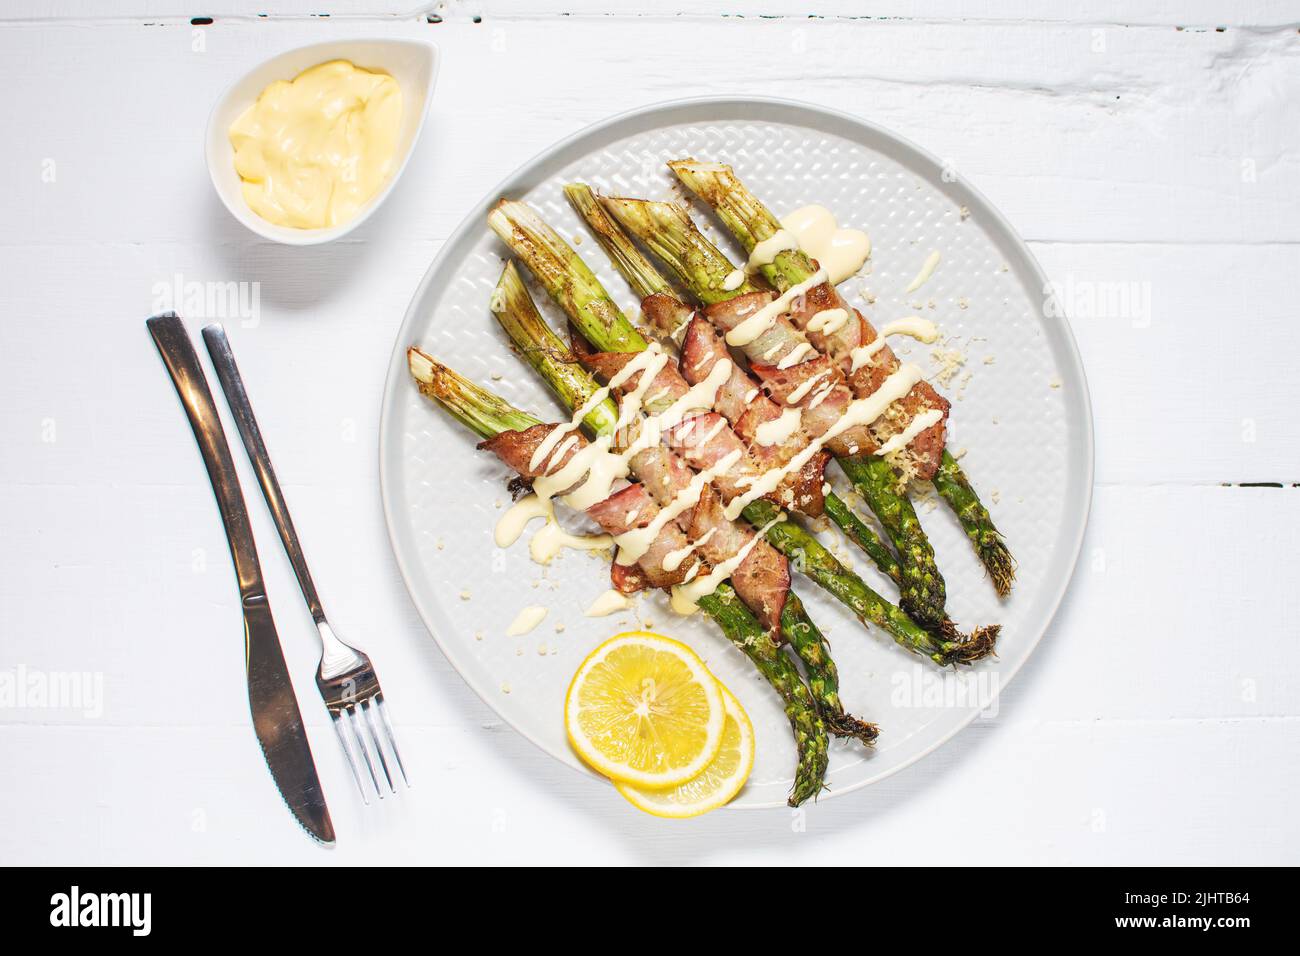 Grilled green asparagus wrapped with bacon. Ketogenic diet. Healthy food, diet menu. Top view, overhead Stock Photo